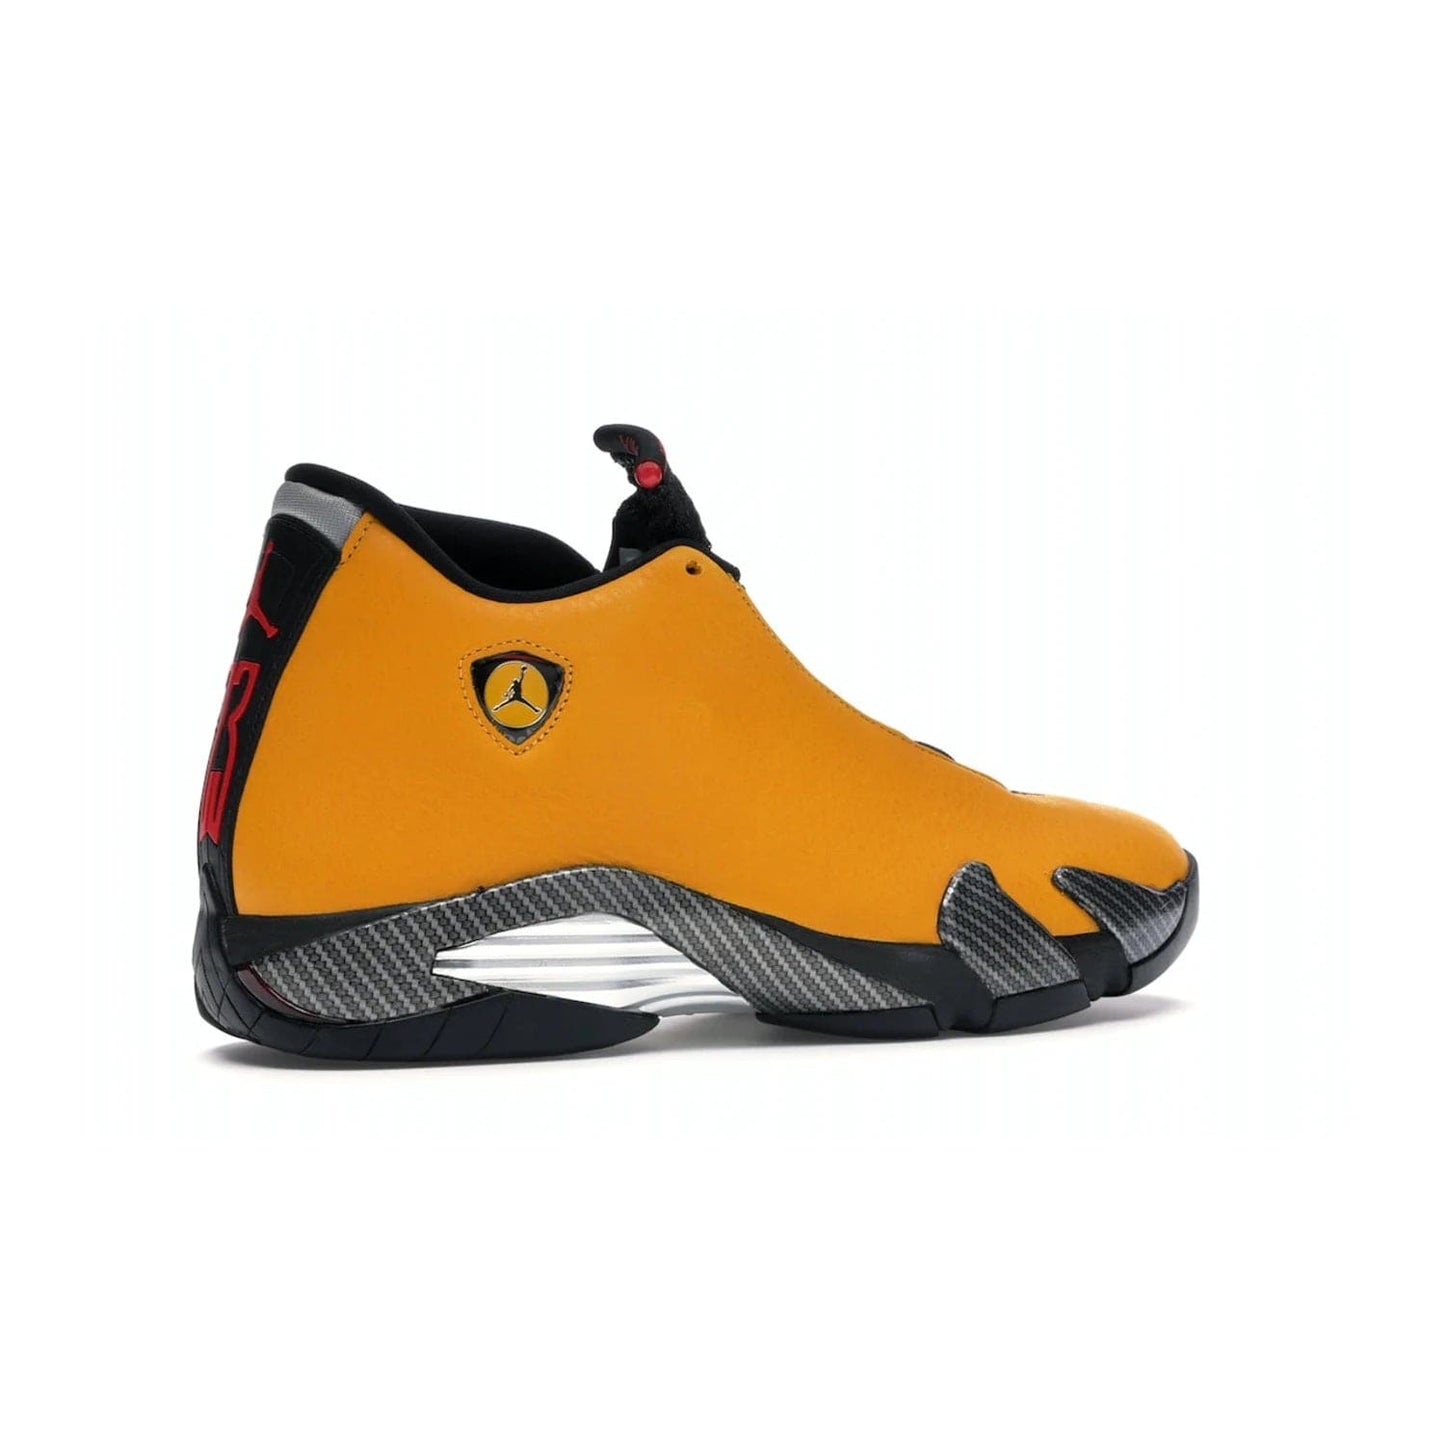 Jordan 14 Retro University Gold - Image 34 - Only at www.BallersClubKickz.com - Air Jordan 14 Retro University Gold: High-quality leather sneaker with Jumpman, tongue & heel logos. Zoom Air units & herringbone traction for superior comfort. University Gold outsole for stylish streetwear.